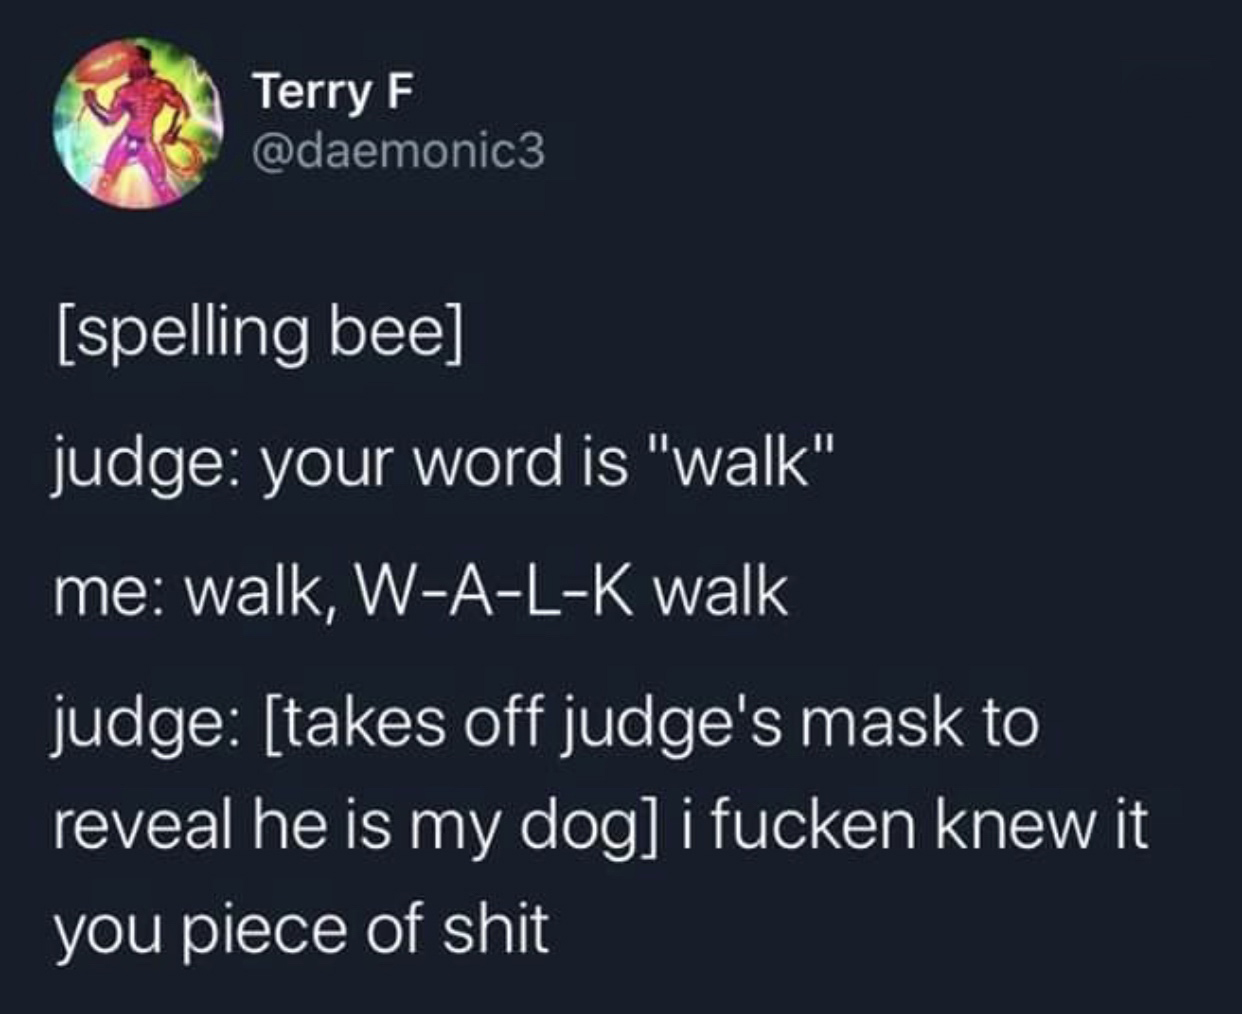 sky - Terry F spelling bee judge your word is "walk" me walk, WALK walk judge takes off judge's mask to reveal he is my dog i fucken knew it you piece of shit